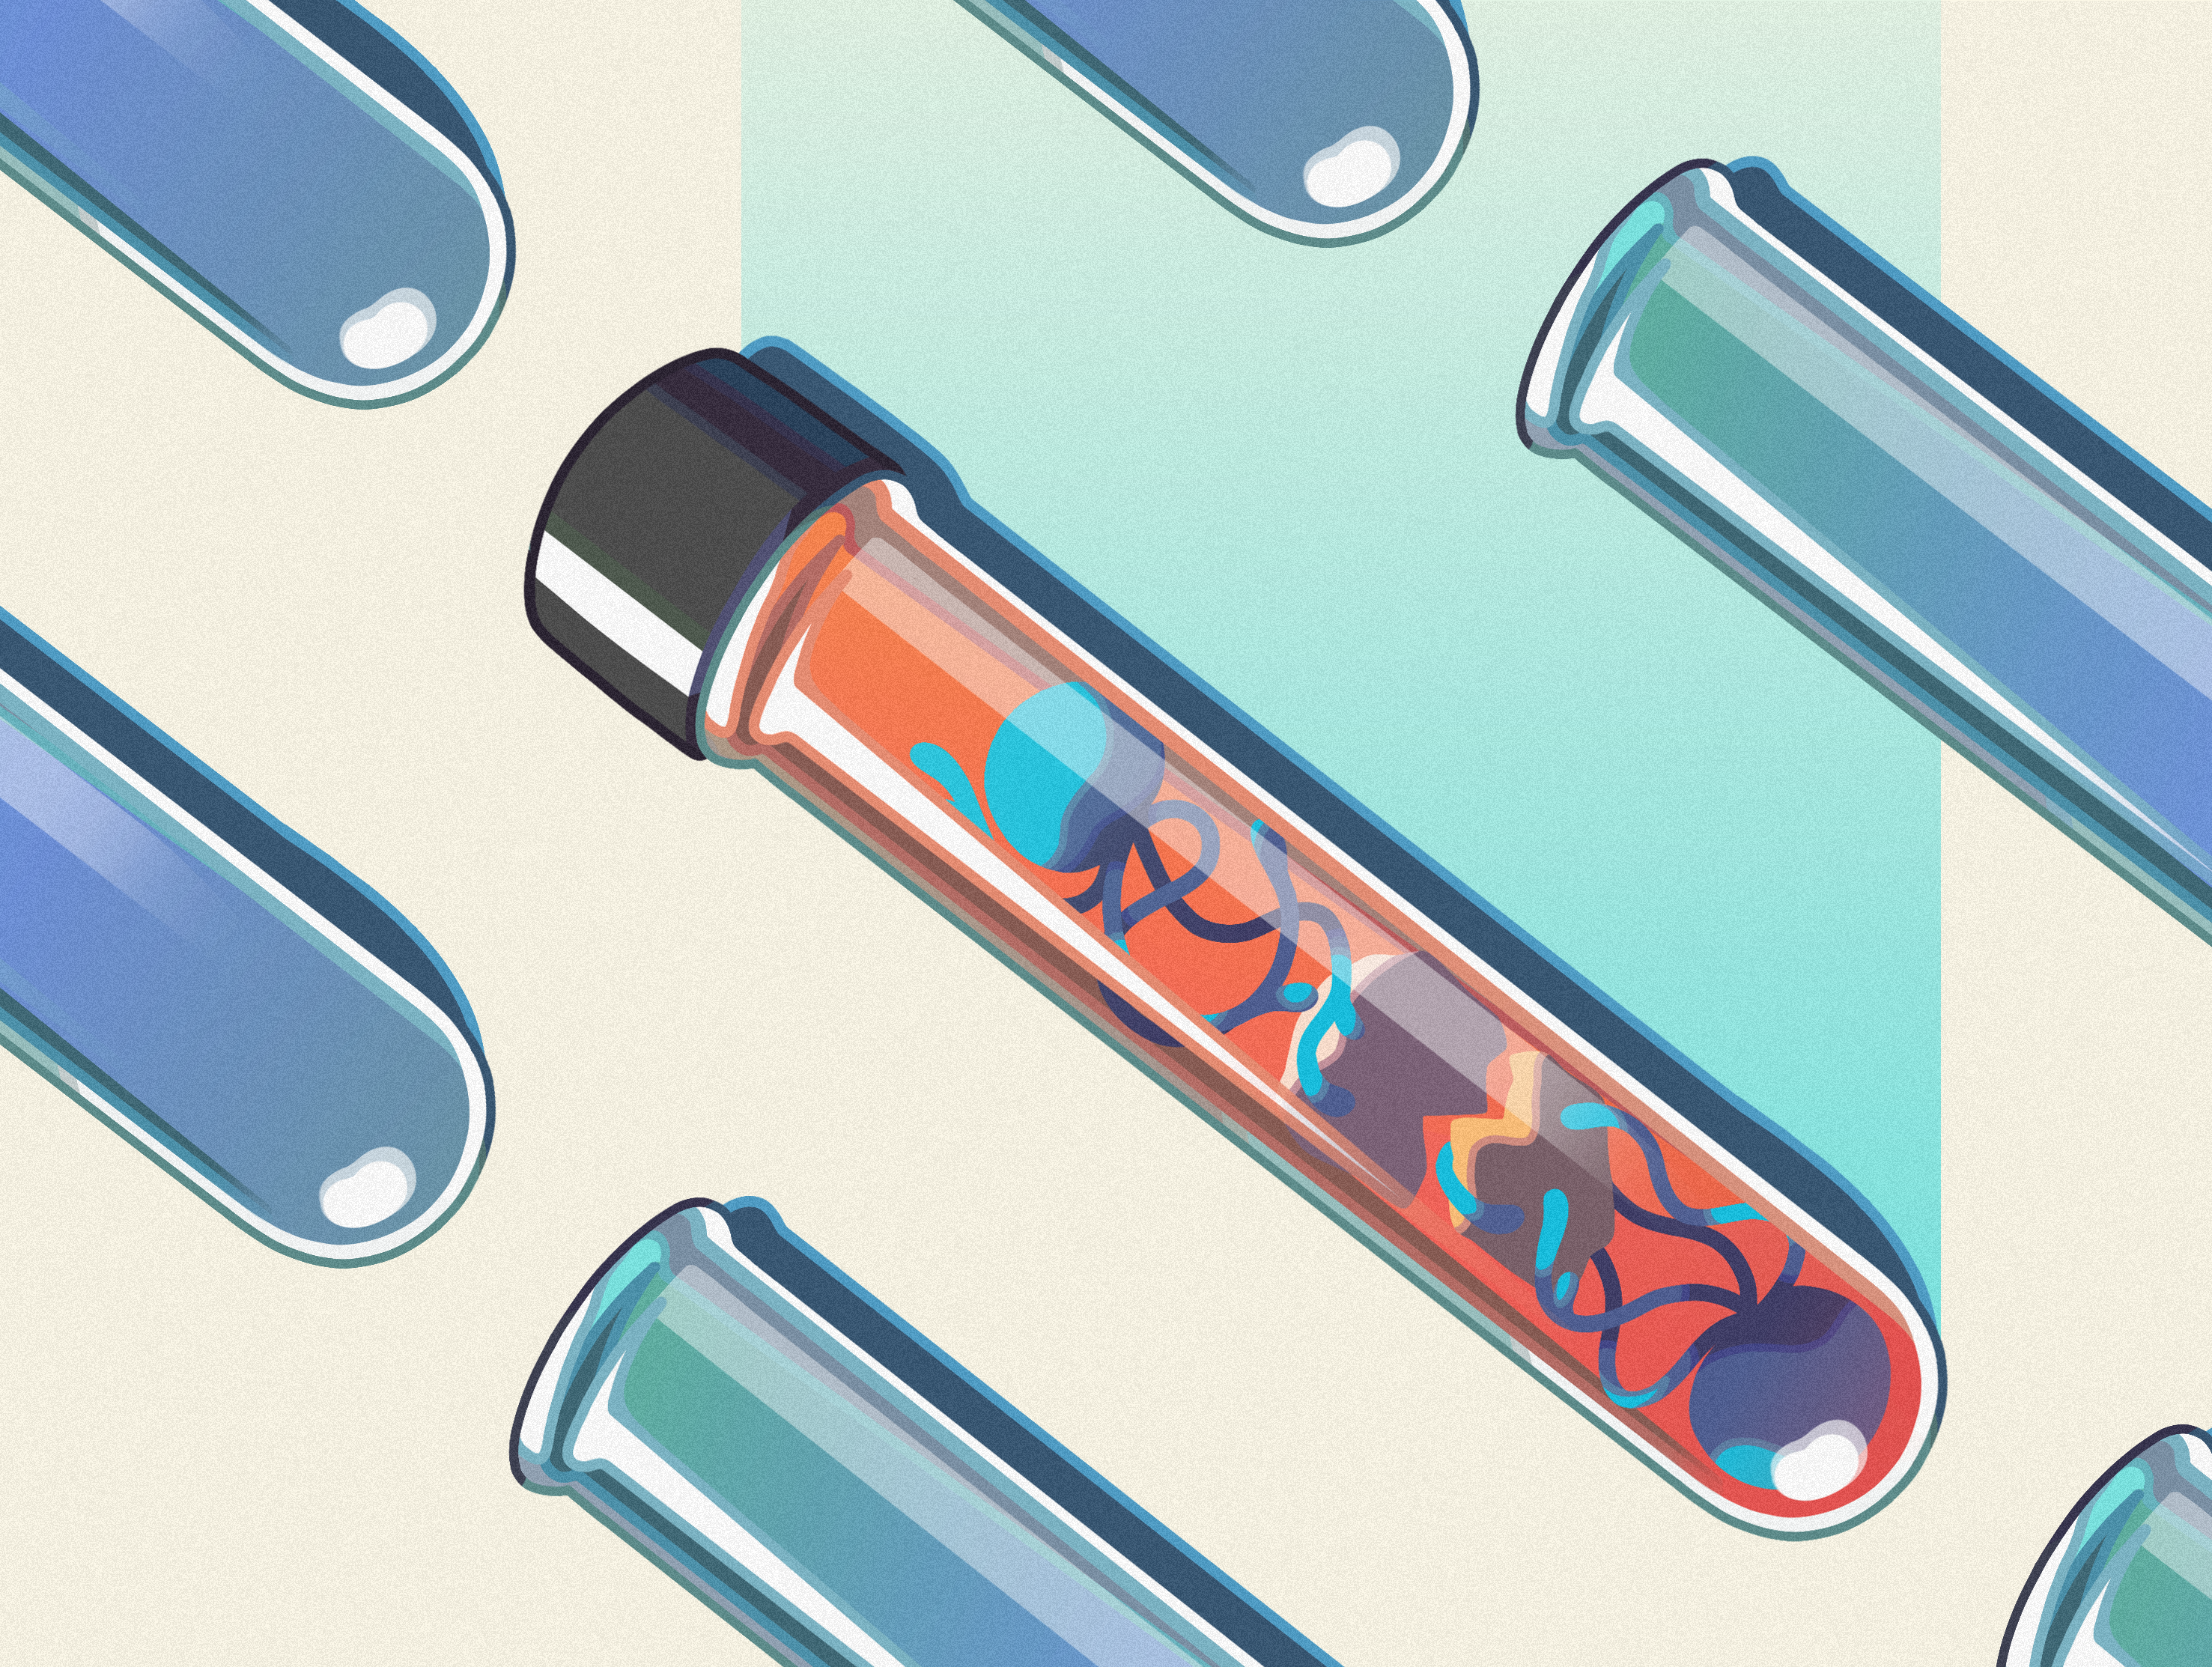 A vial containing brightly colored shapes representing molecules sits on a beige surface next to empty blue vials